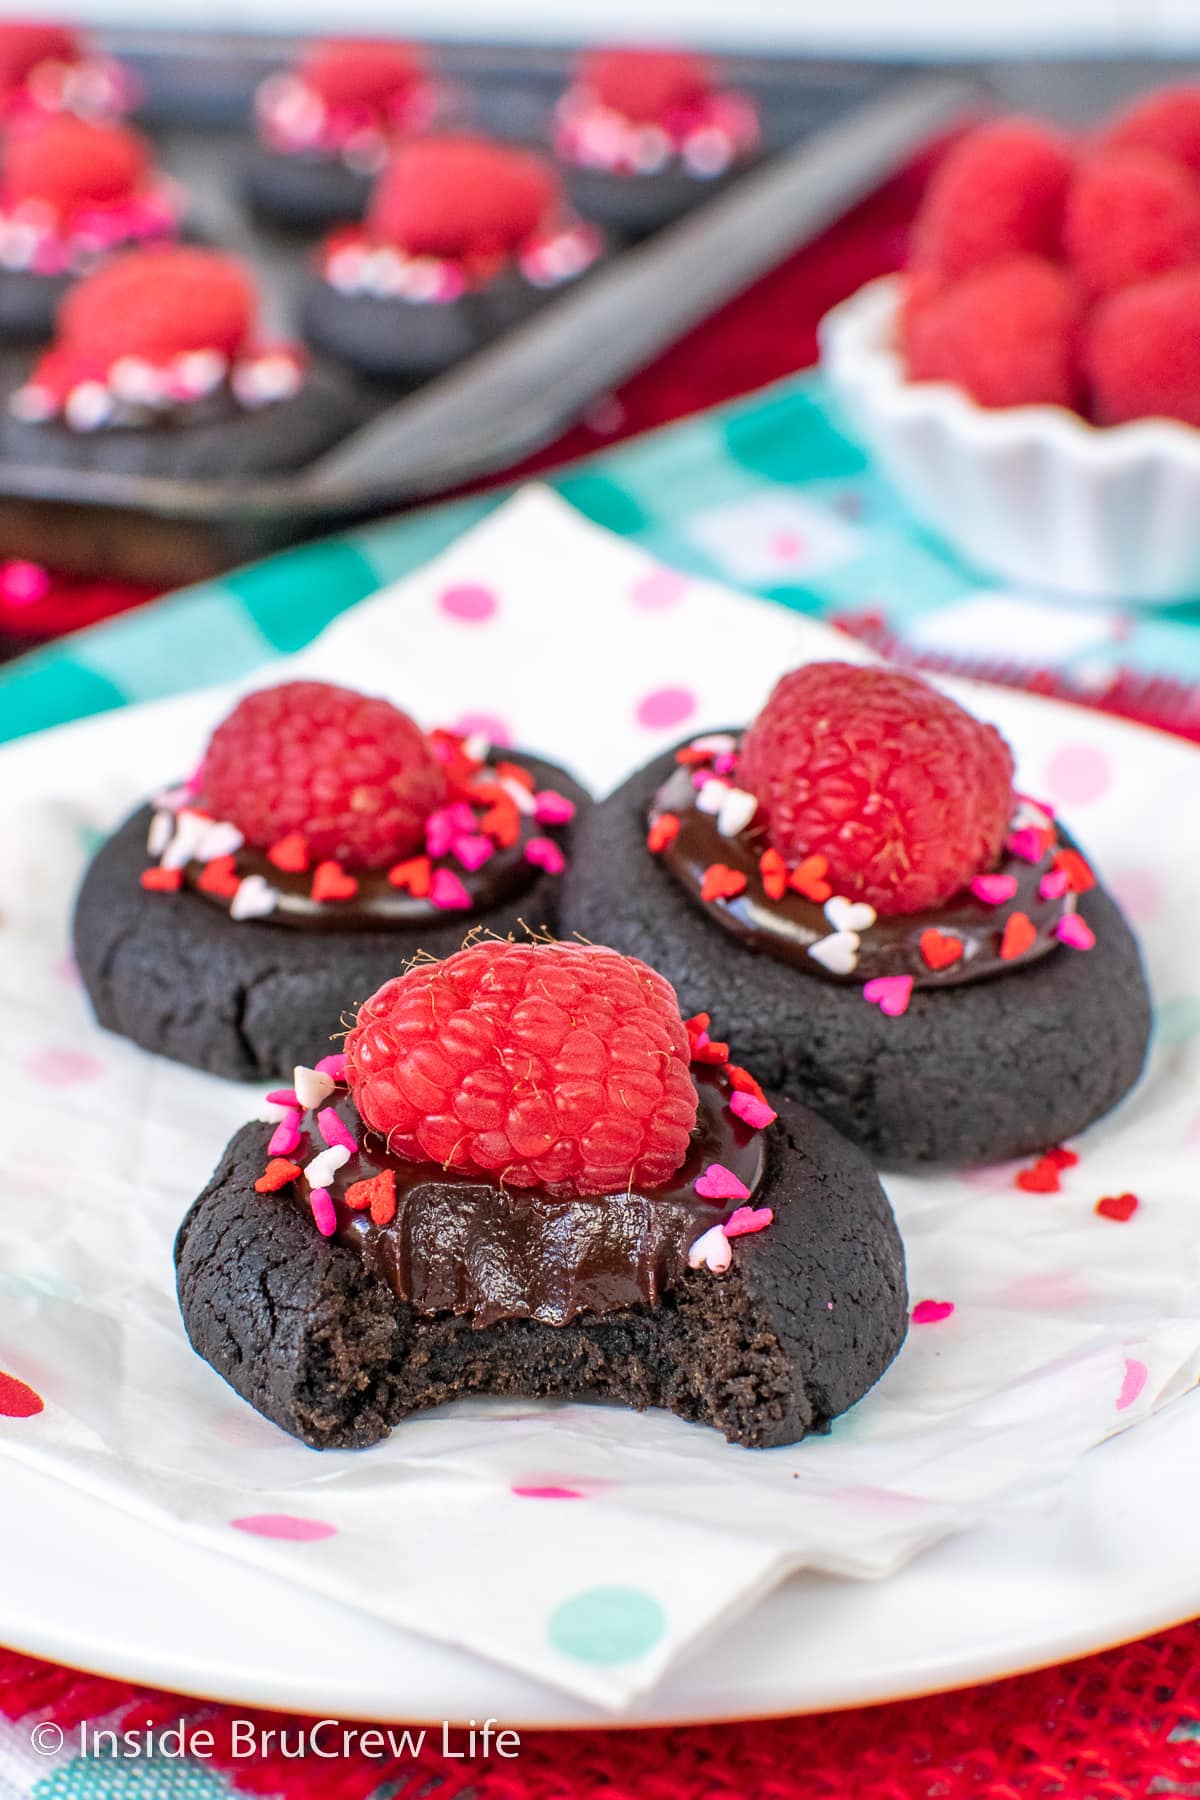 Three chocolate thumbprints topped with raspberries on a white plate.